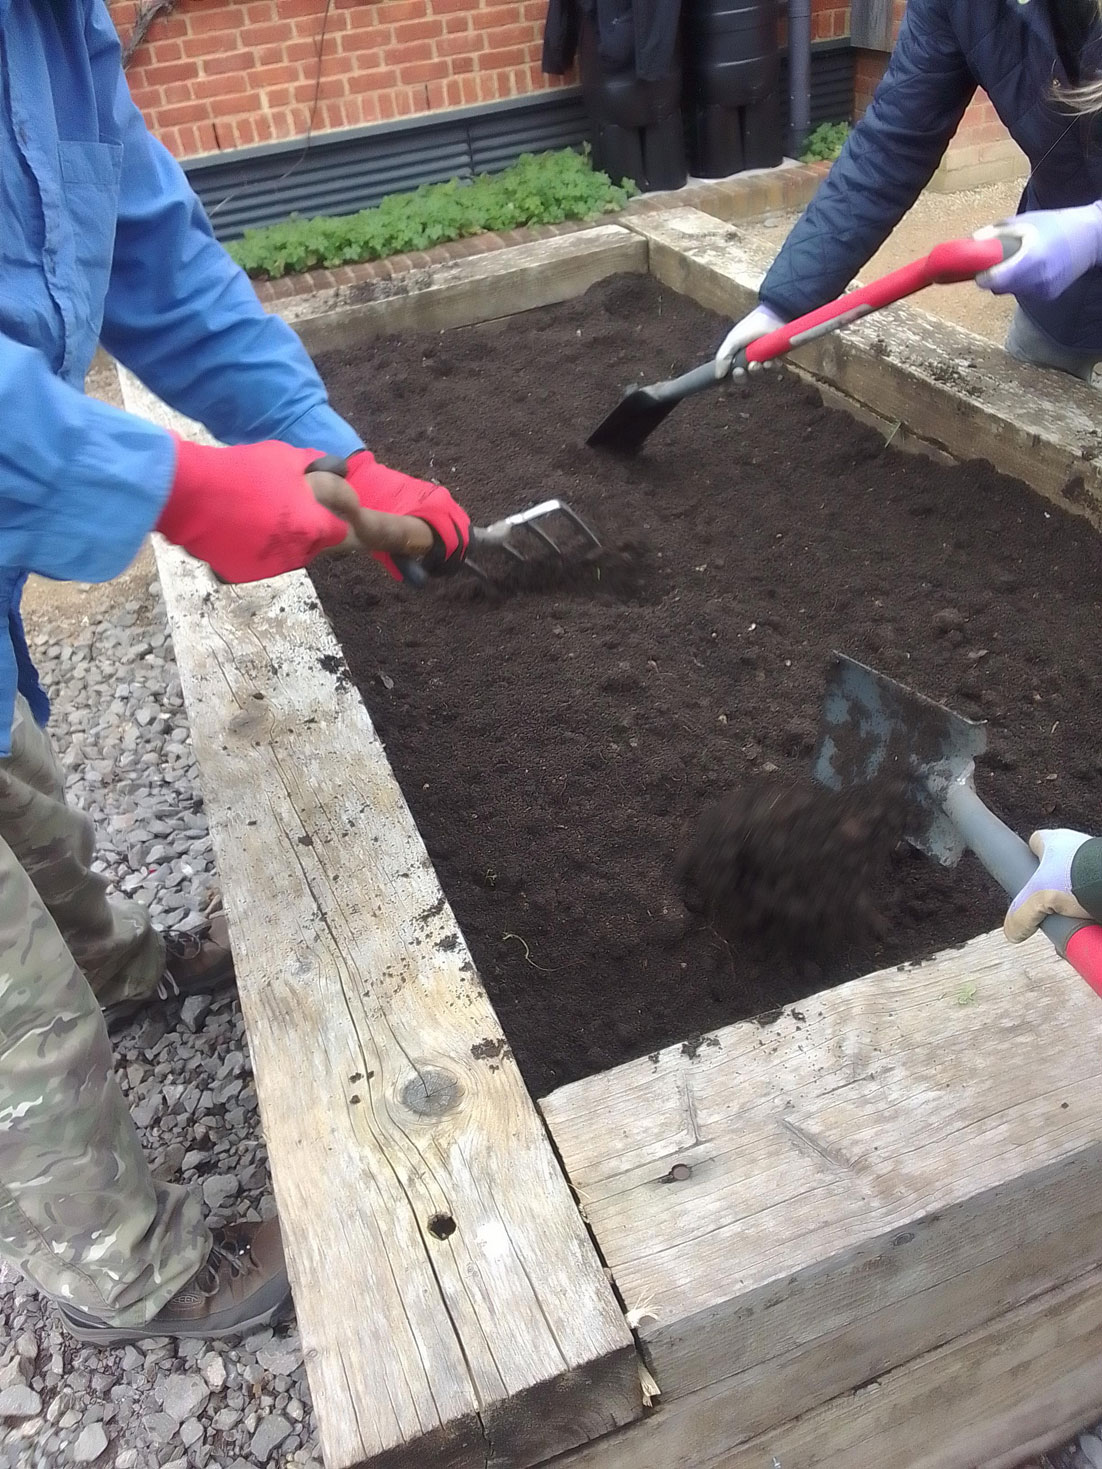 3 people use spades to level compost in a raised bed